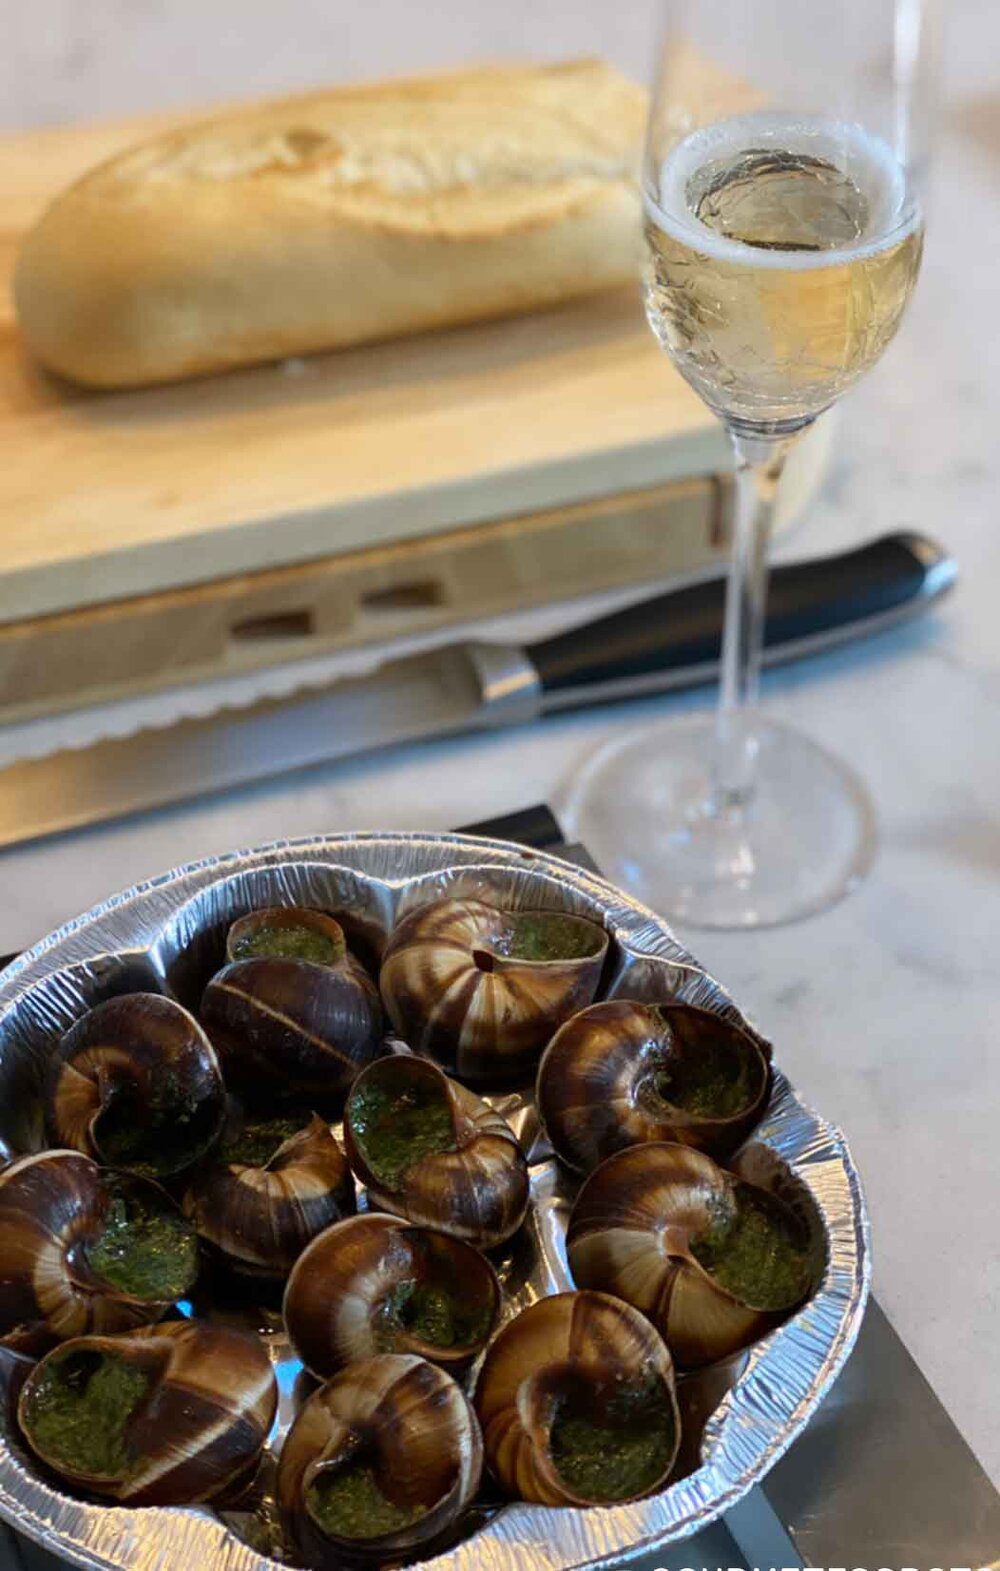 productive things to do at home try new recipe escargot, champagne and french baguette